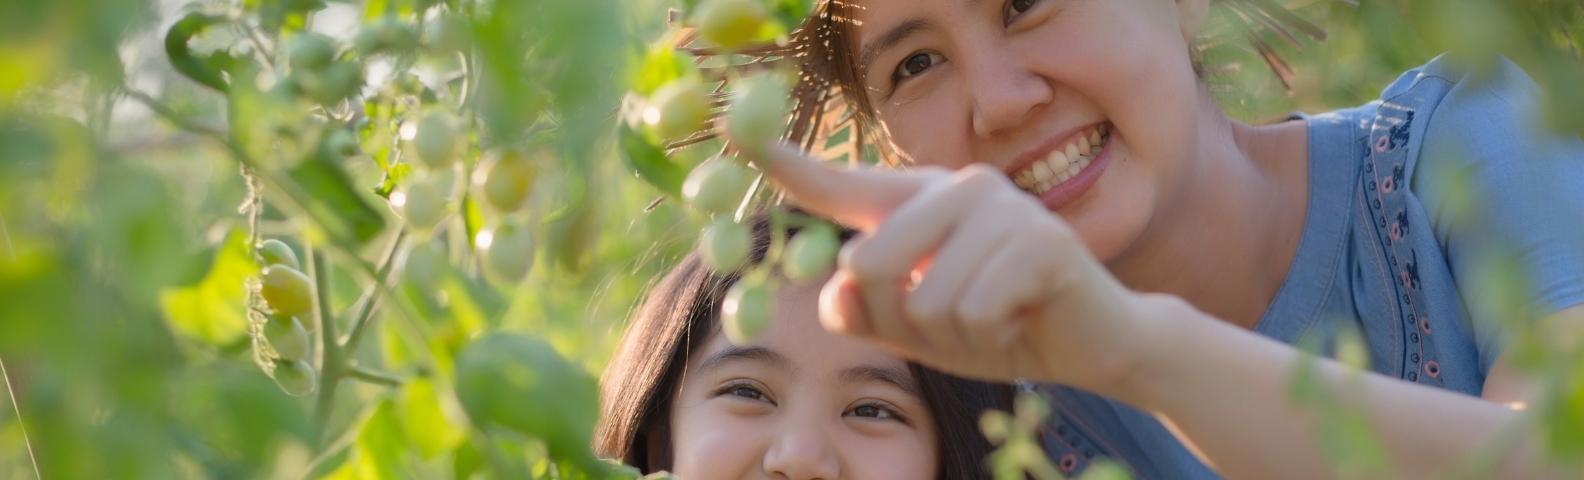 image of mother and daughter looking at grapes on a vine